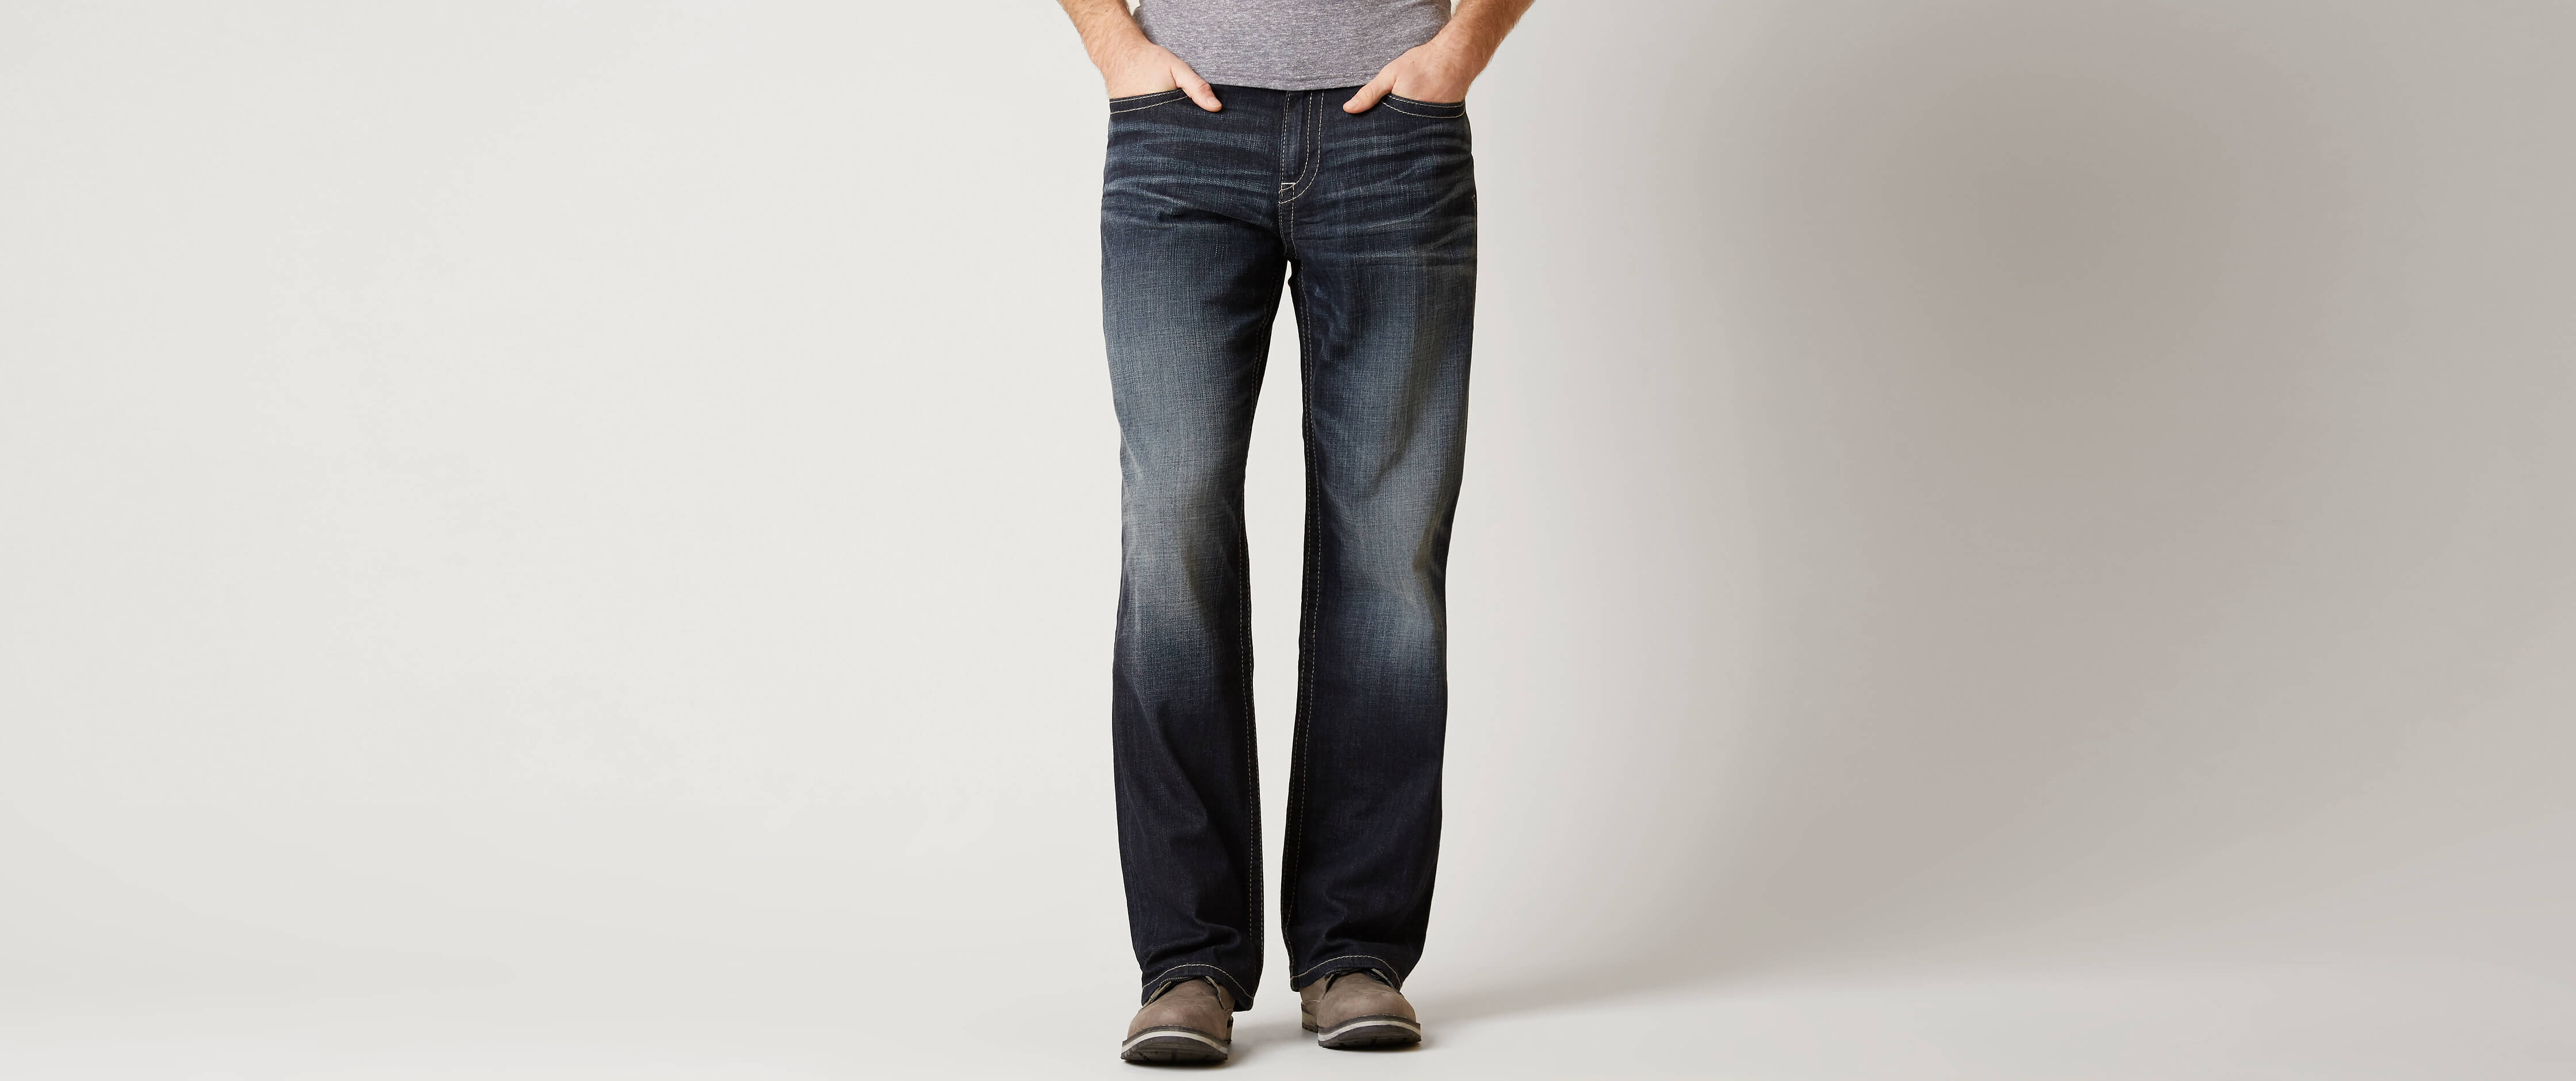 buckle seth jeans